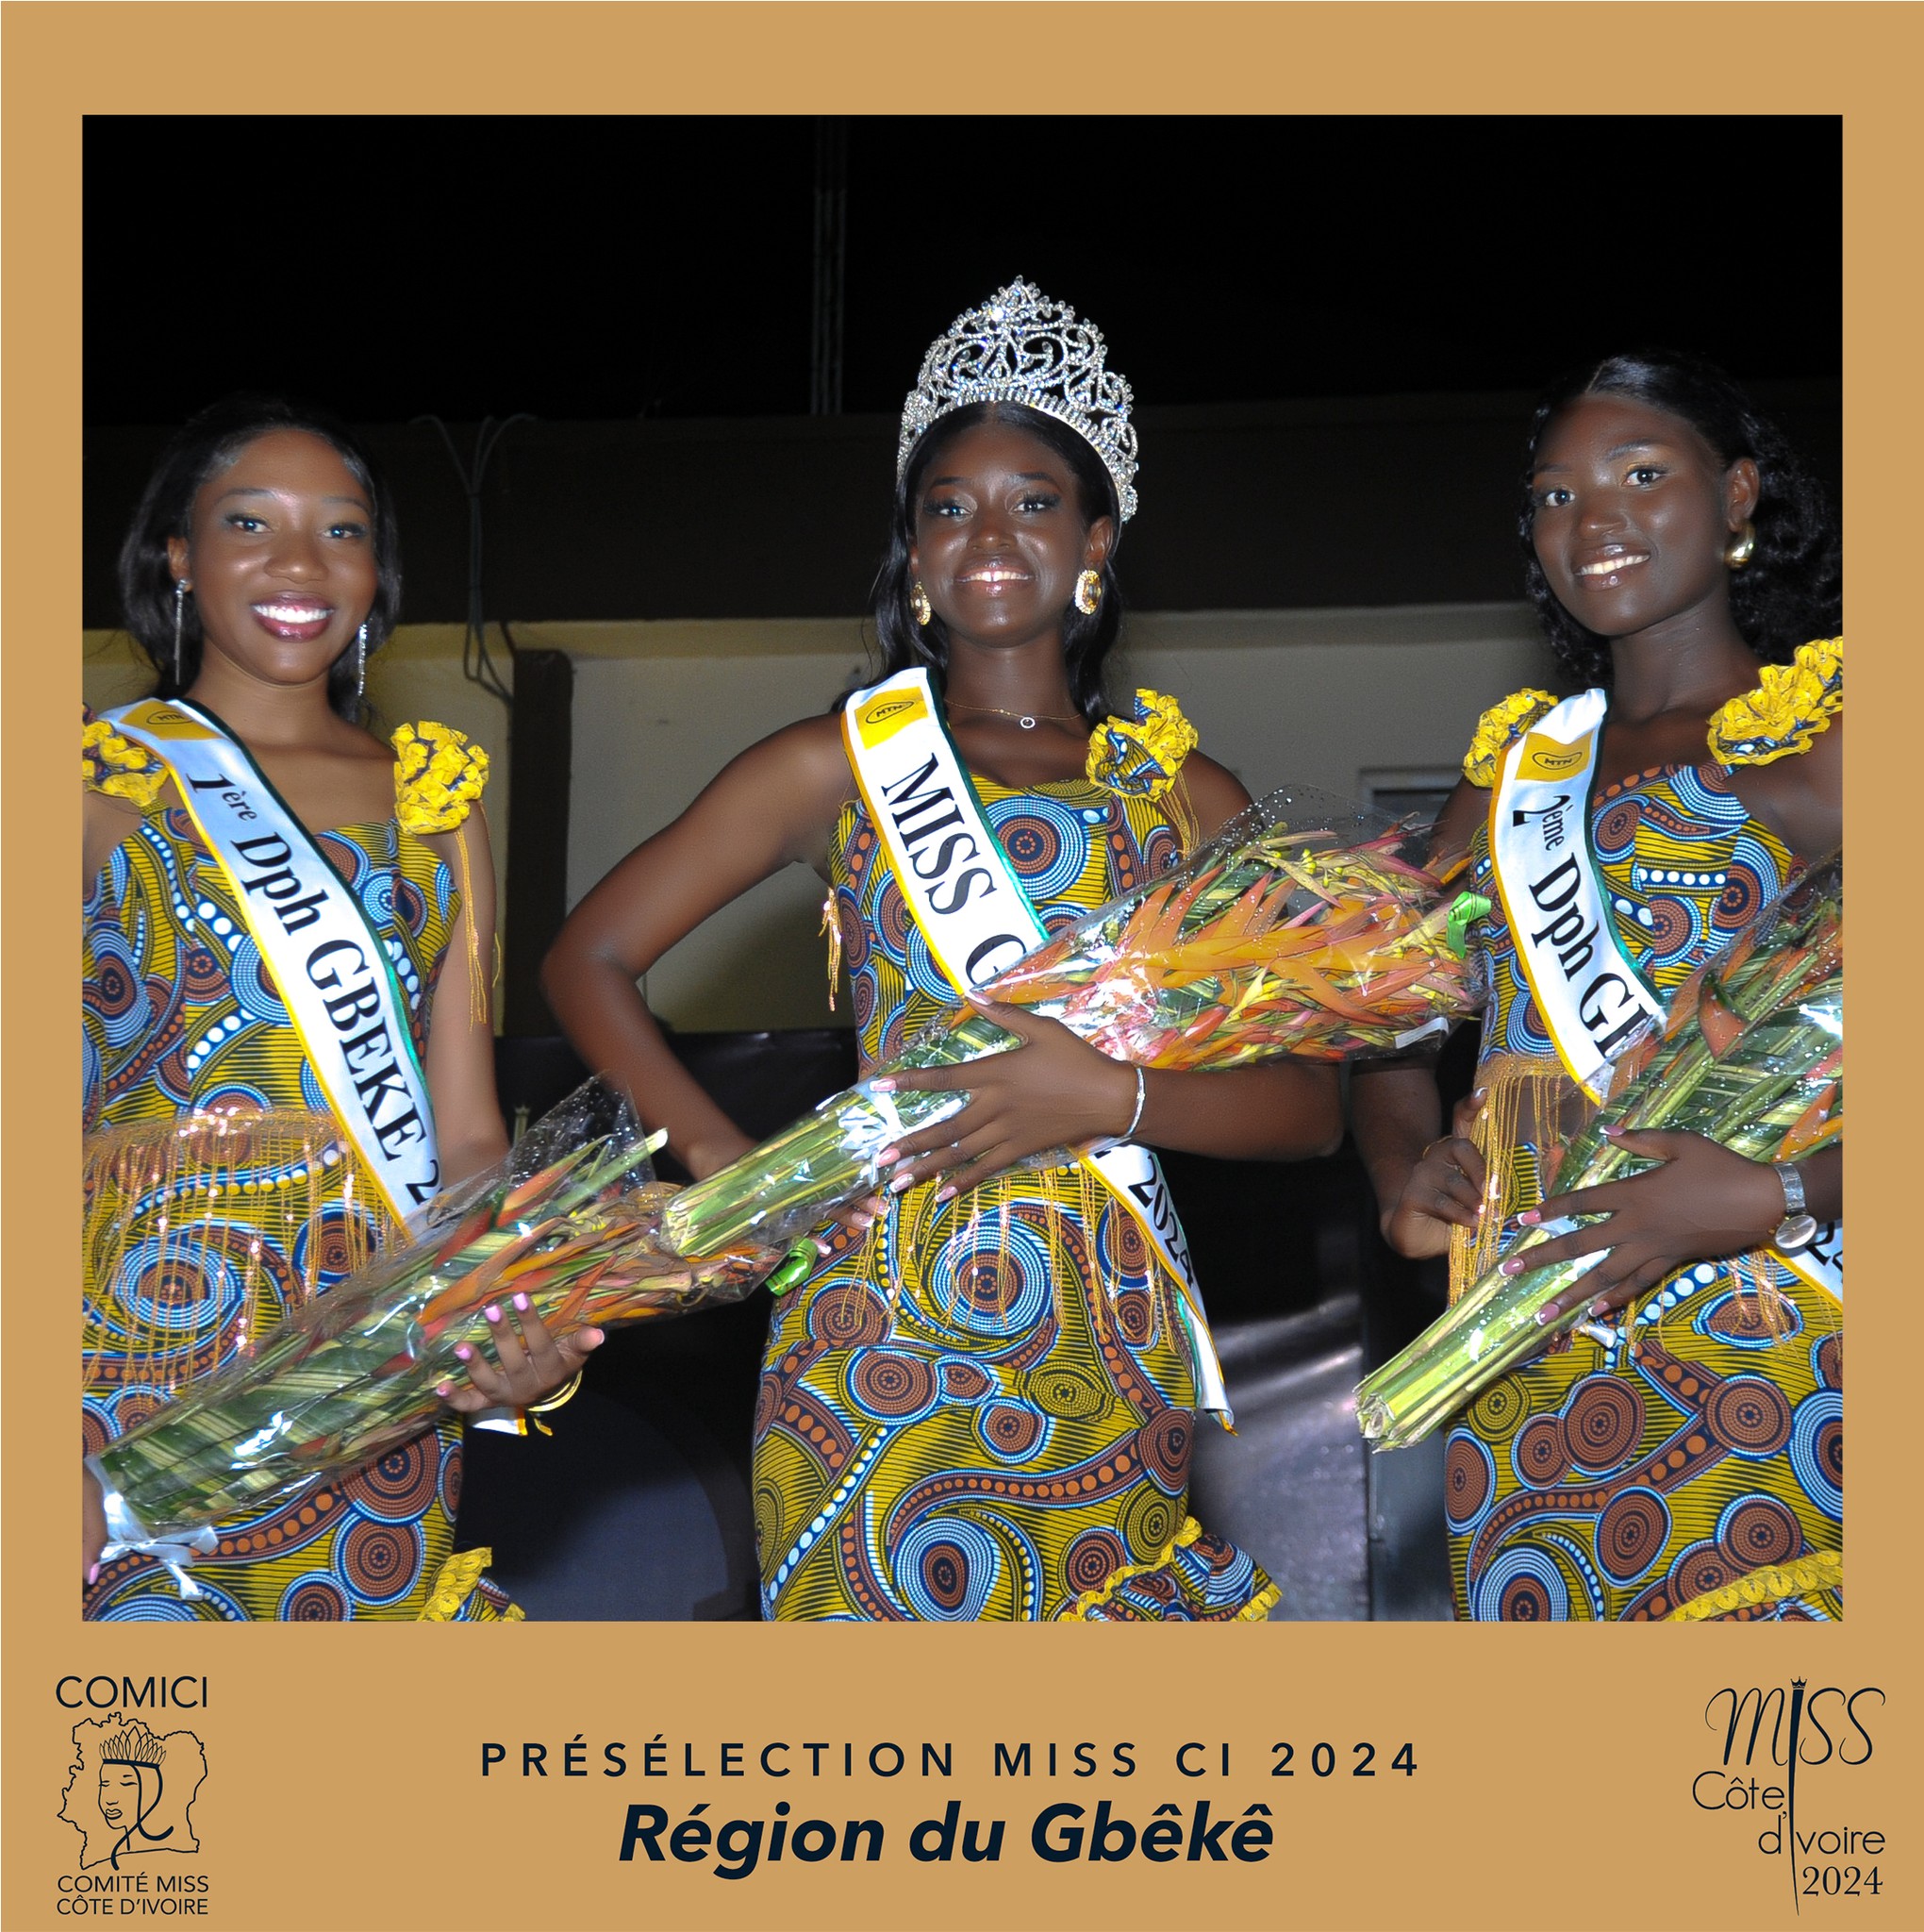 Preselection Miss Cote d'Ivoire 2024 -  Final Miss BOUAKE - District of GBEKE - Winner is Miss Konate Bintou - Contestant Number 2